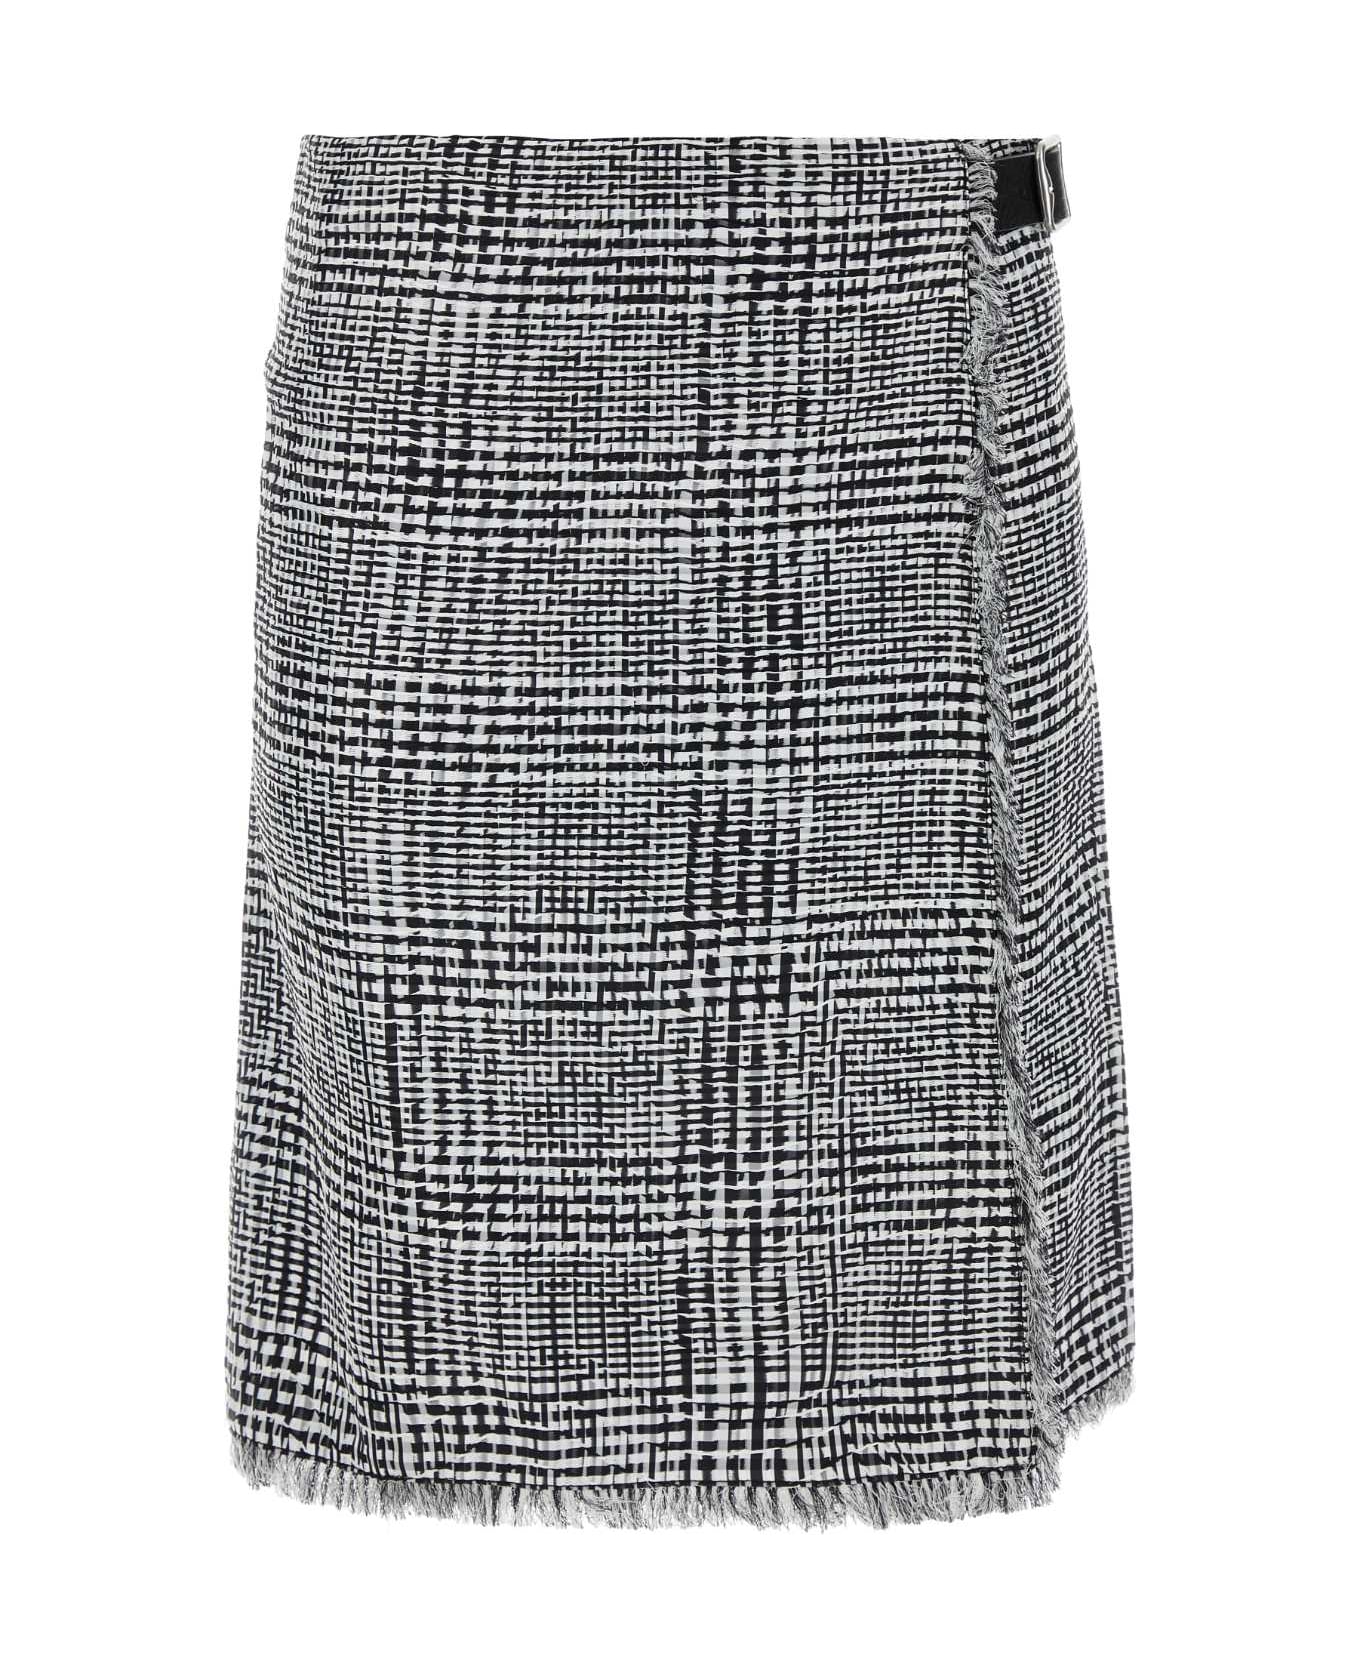 Burberry Embroidered Houndstooth Skirt - MONOCHROMEIPPTTN